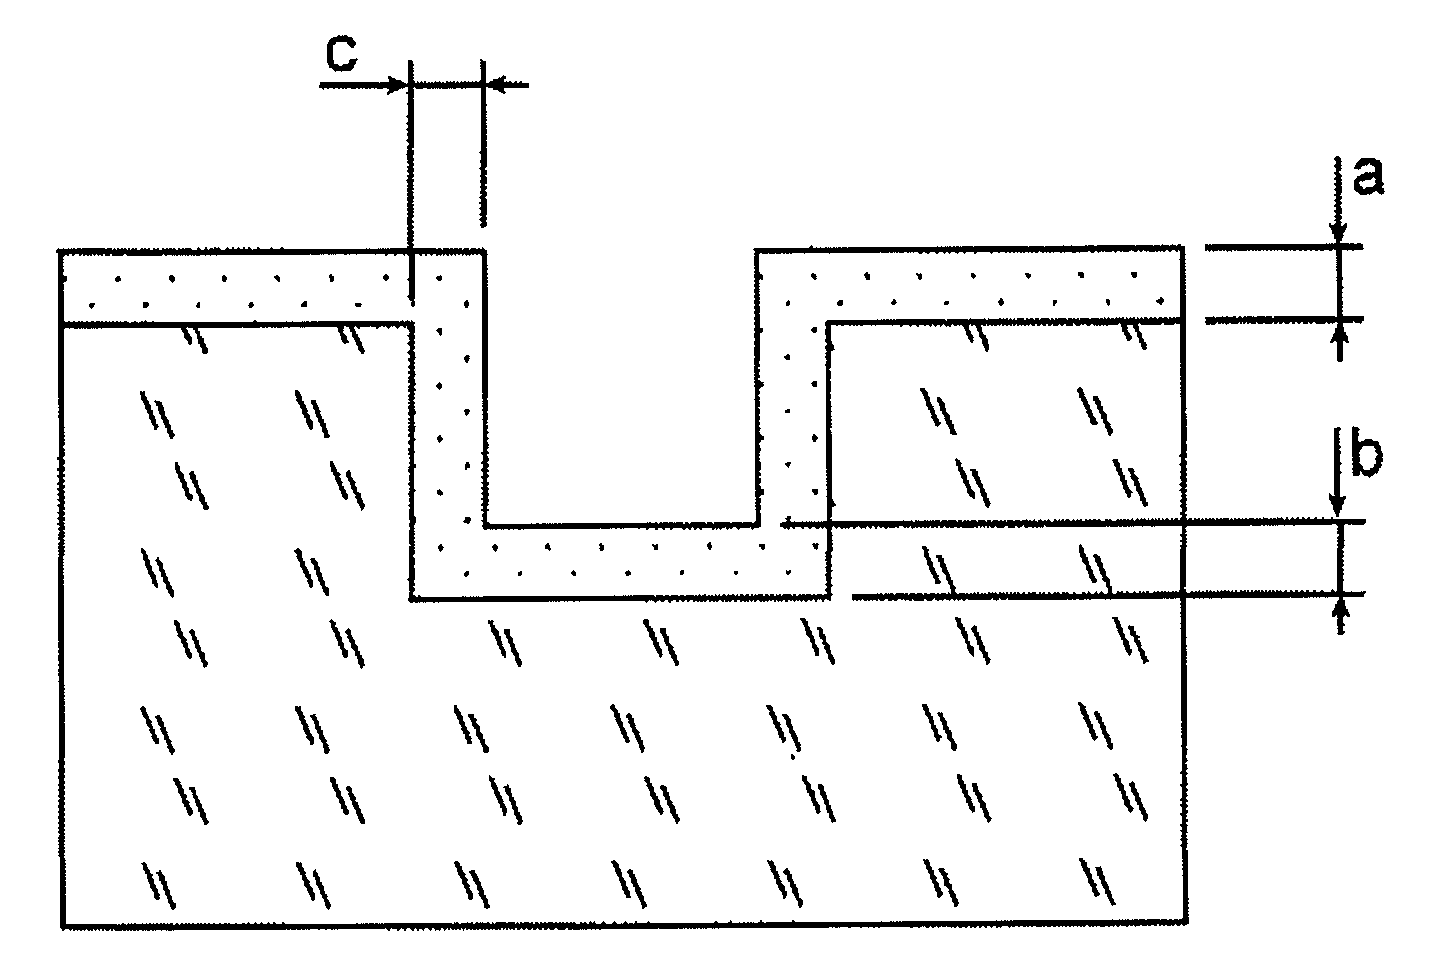 Process For Producing a Coating Based on an Oxide Ceramic that Conforms to the Geometry of a Substrate Having Features in Relief